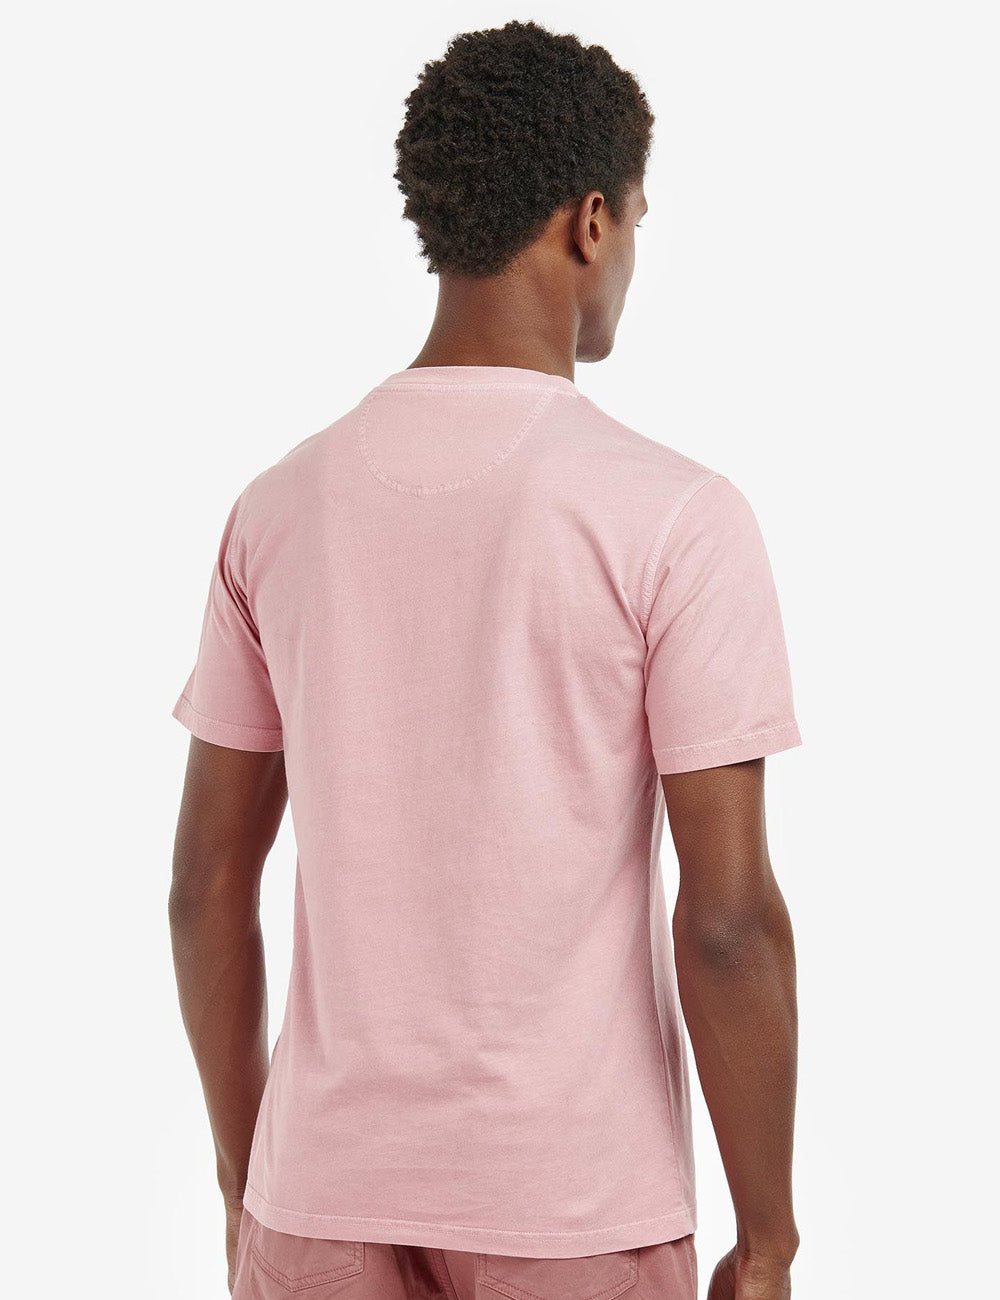 Back of man wearing the Garment Dyed T-Shirt